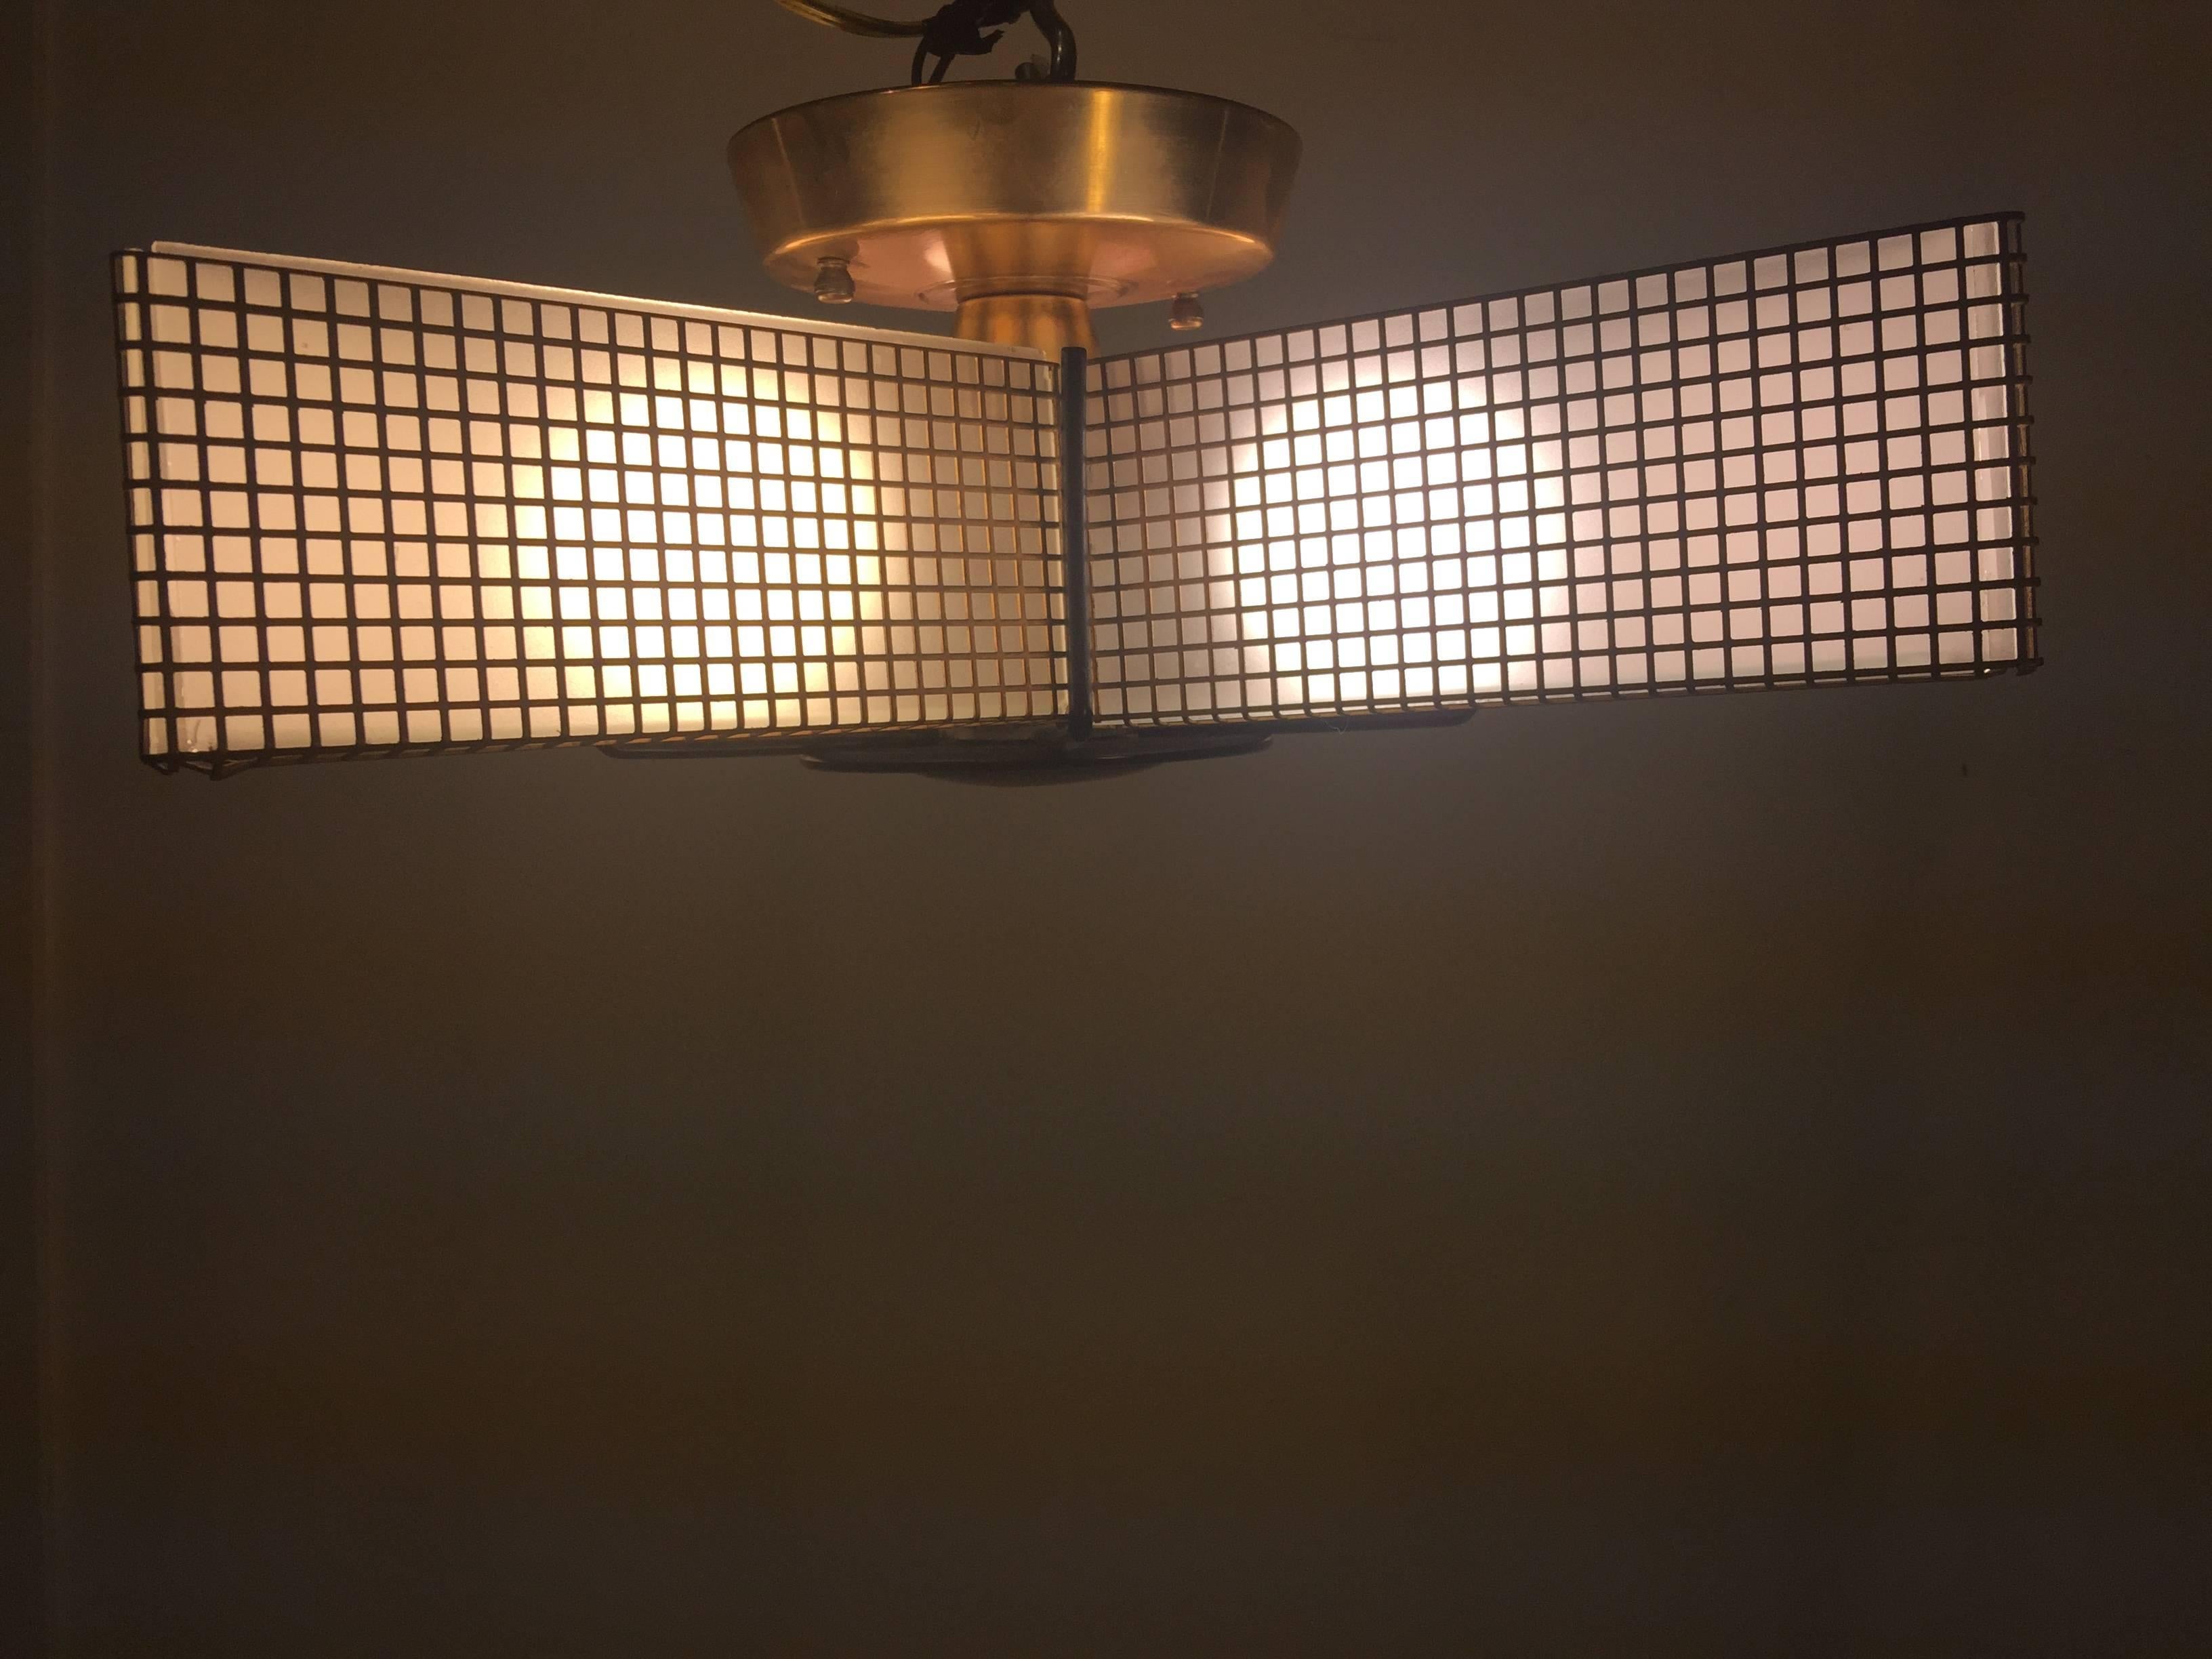 Midcentury star chandelier comprised of brass square design mesh frame and black enameled brass bulls eye centre with radiating lines that form the bottom of the chandelier. White geometric design etched glass panels are set within the five arms